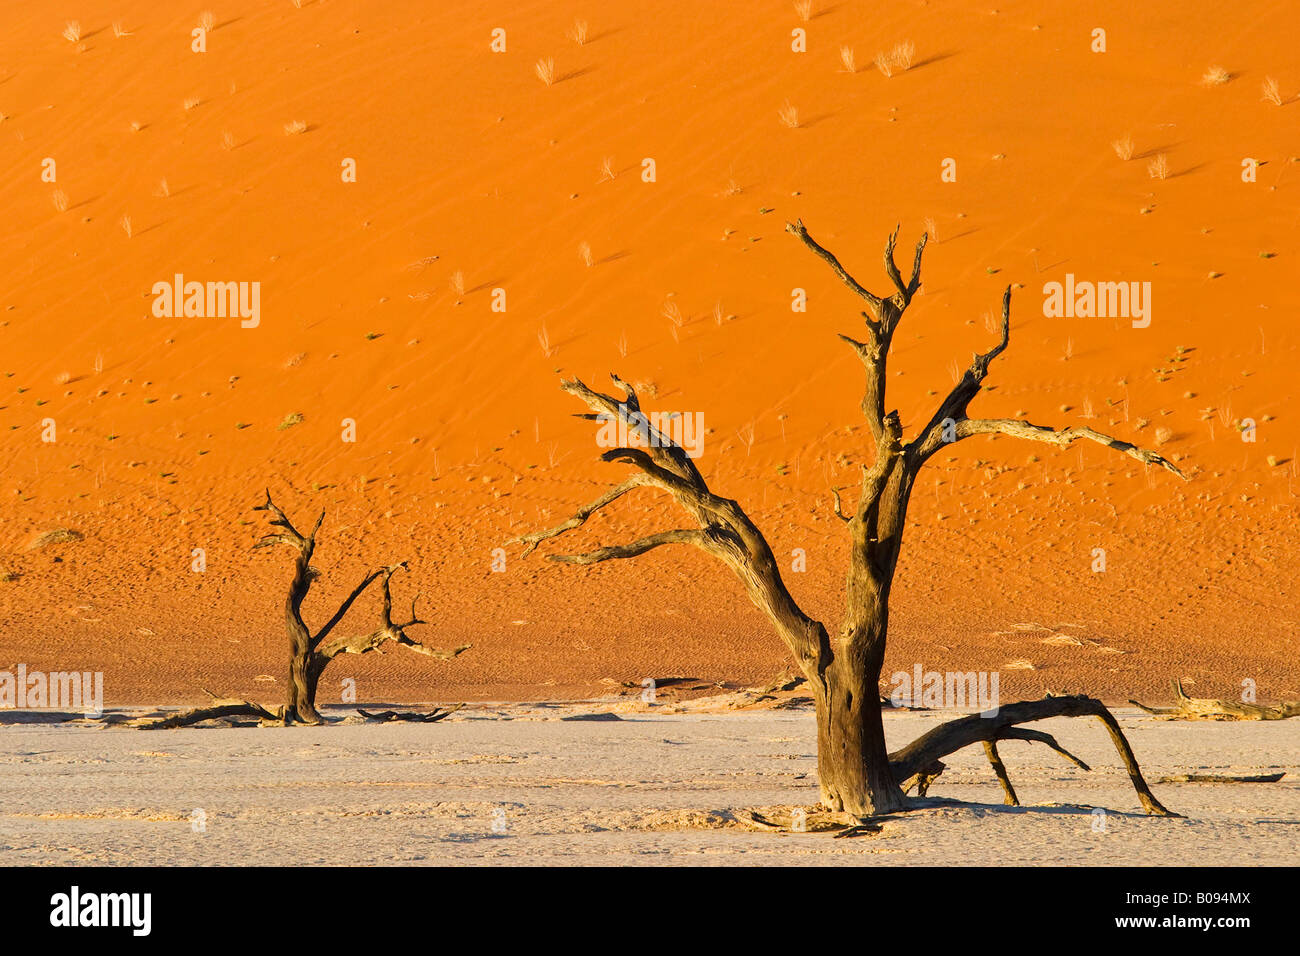 Dead trees on a dried up clay pan in Deadvlei, Namib Desert, Namibia, Africa Stock Photo